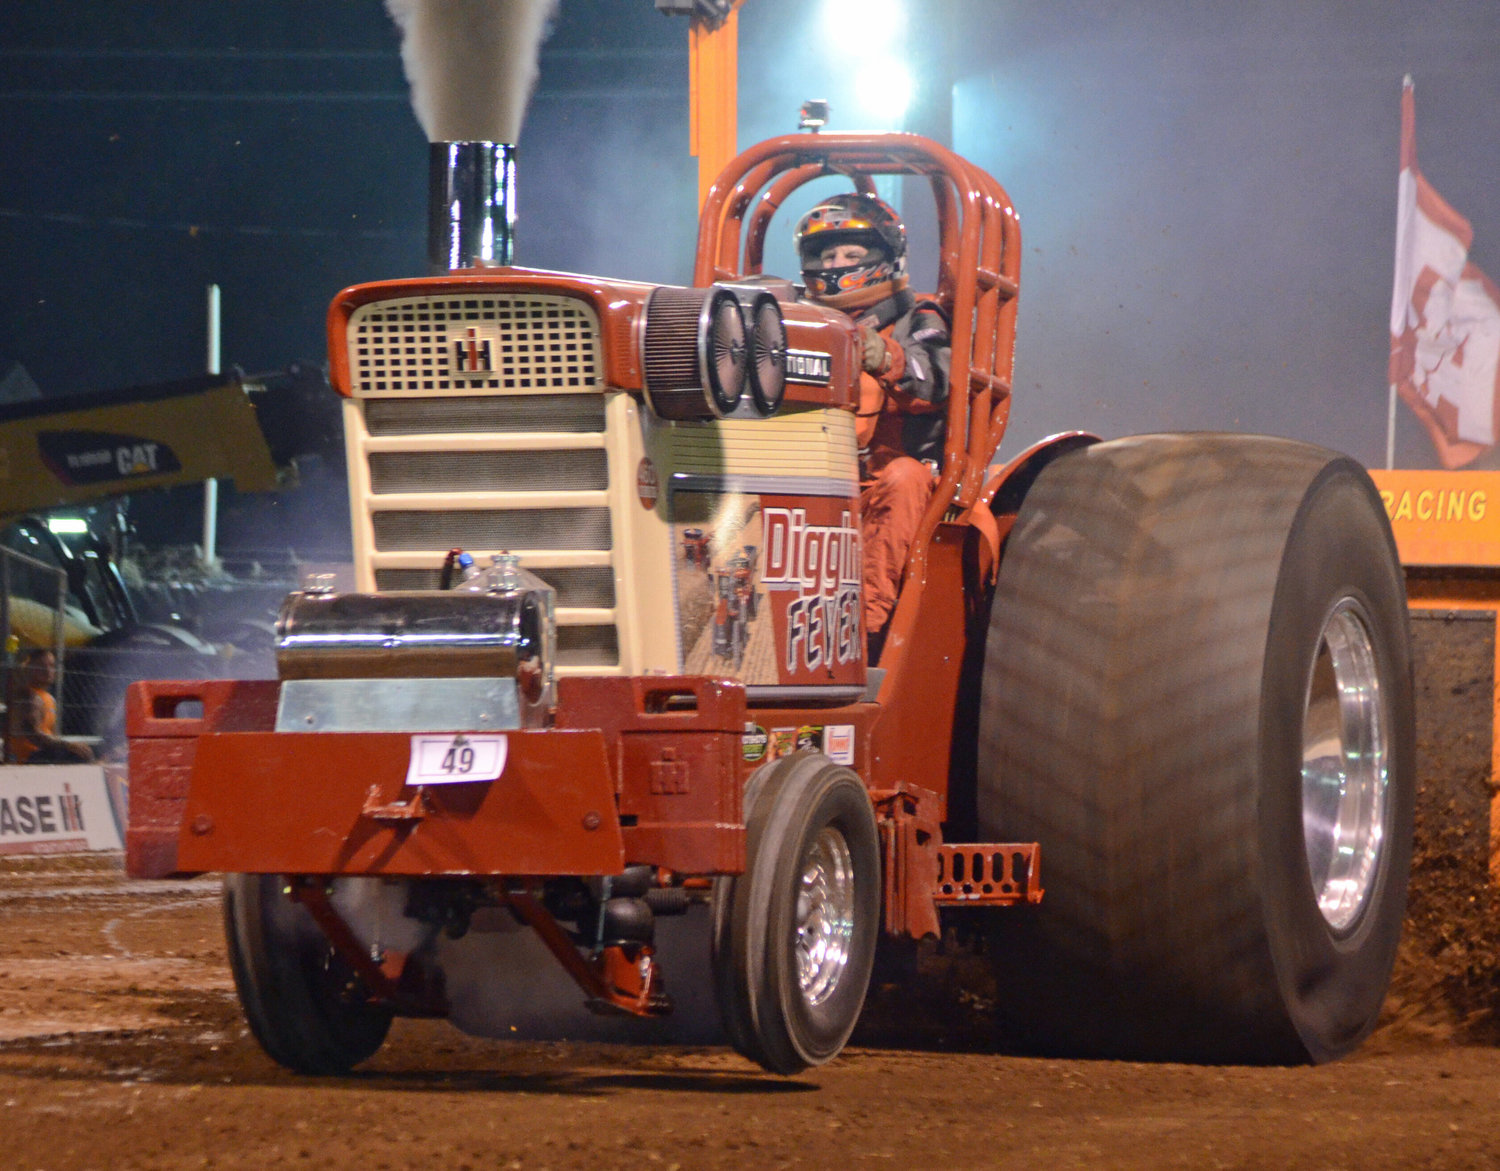 Esdon Lehn took his Diggin? Fever International 400 8,000 pound Super Stock Diesel Tractor to the starting line to open up Friday night?s session went 335.4 feet and that distance held up as the Dayton Minnesota resident won the division.